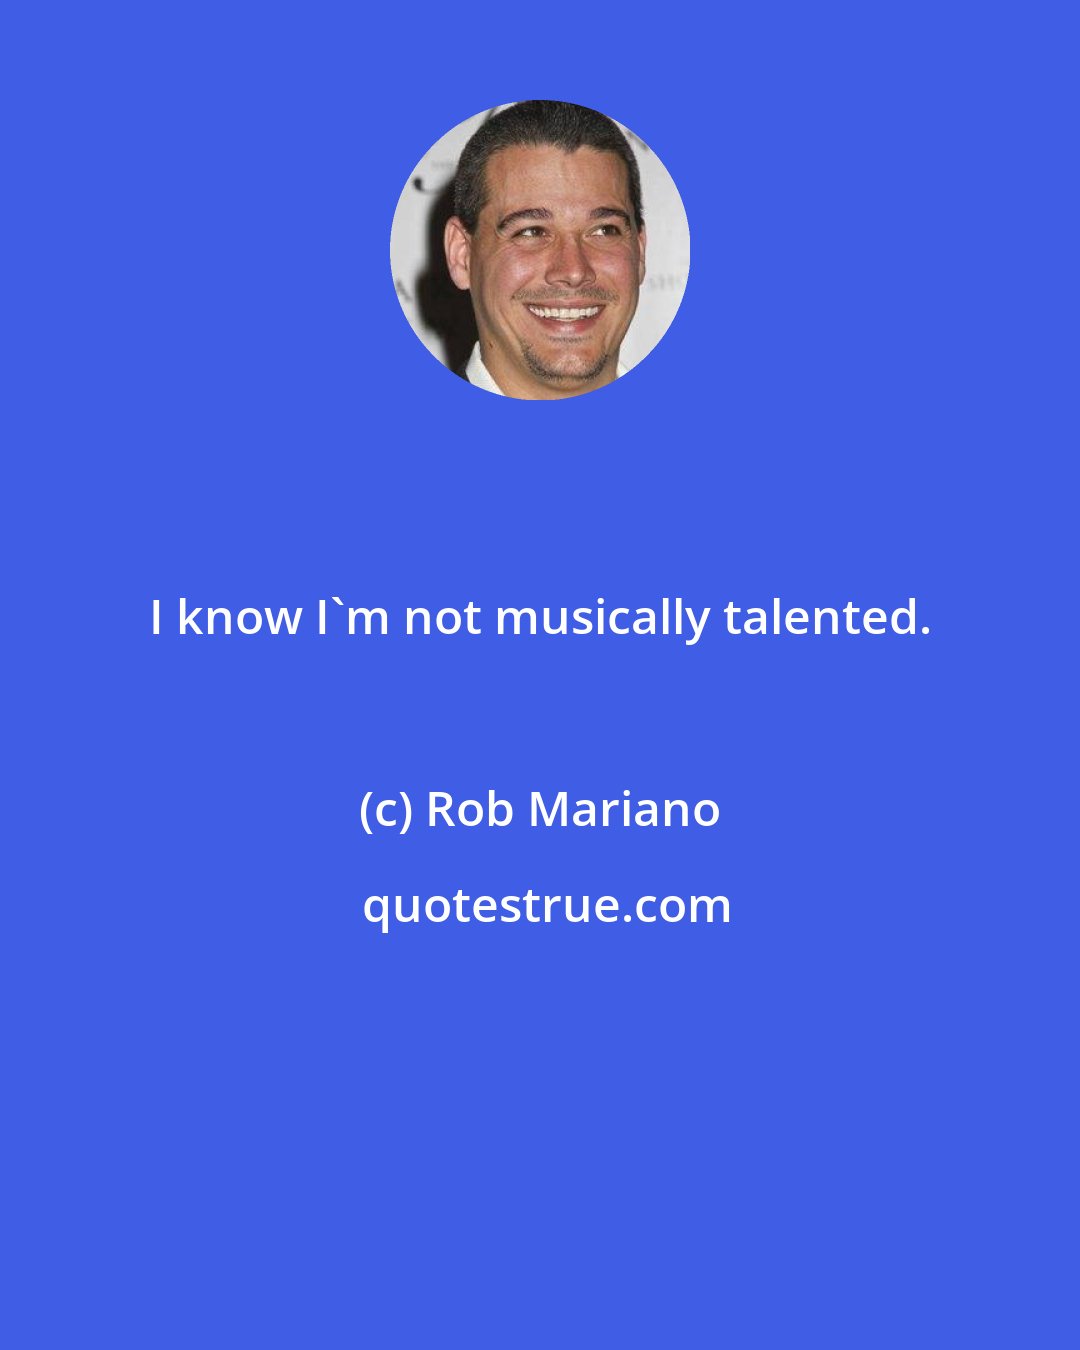 Rob Mariano: I know I'm not musically talented.